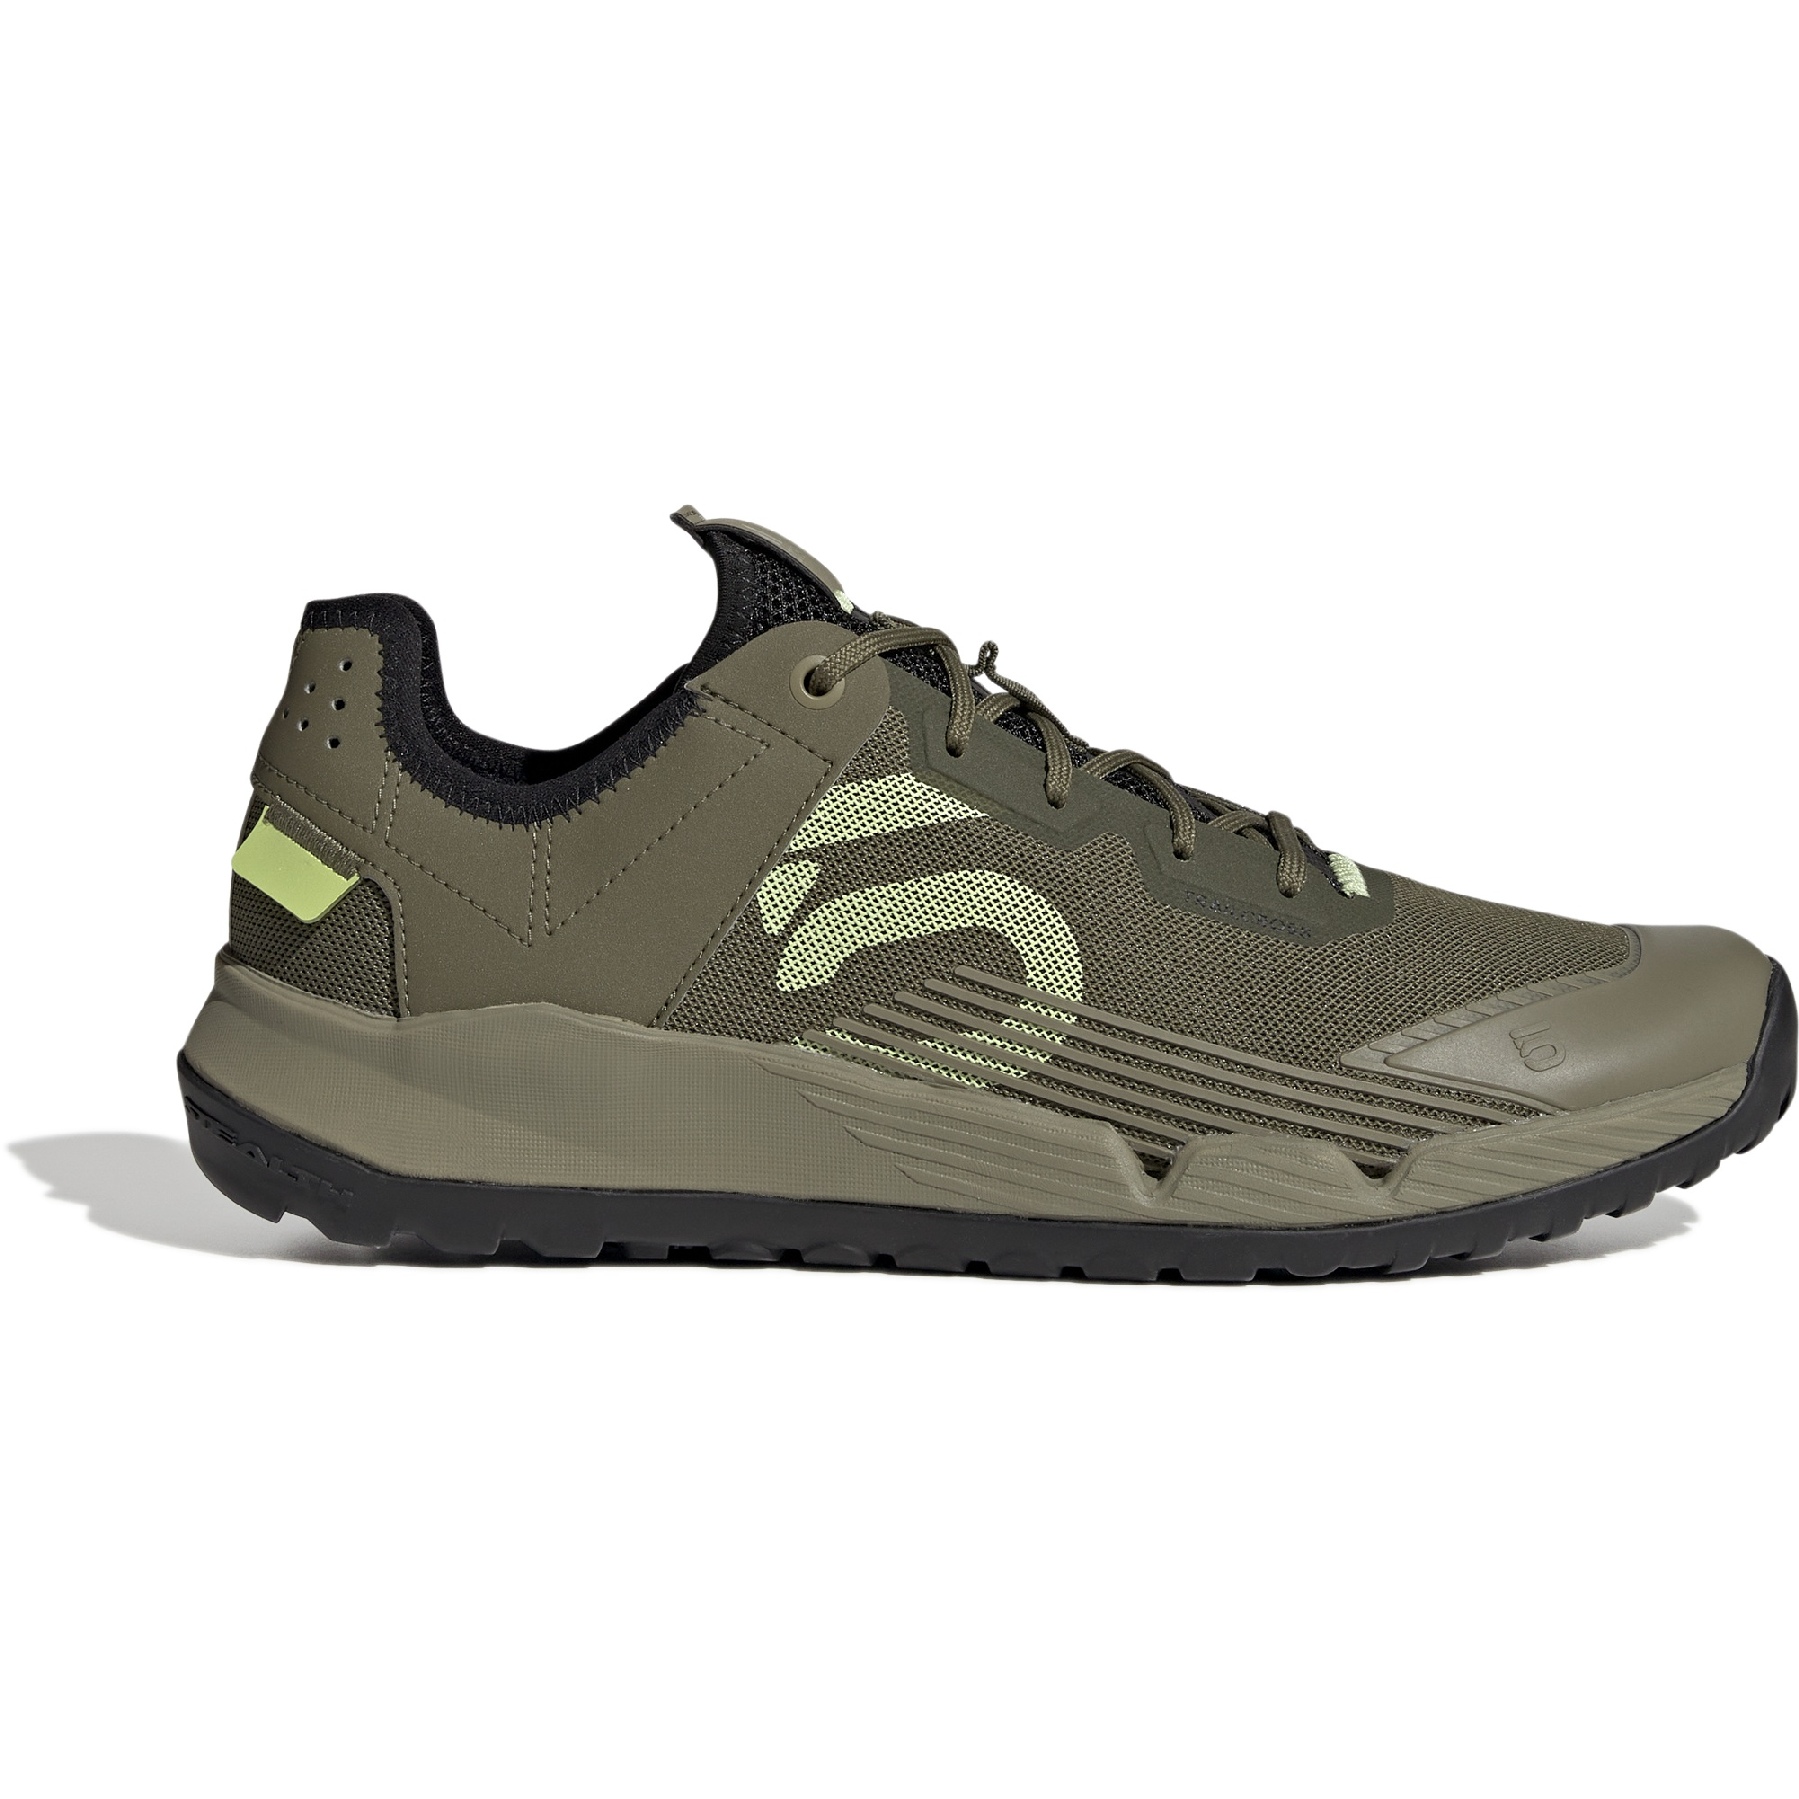 Picture of Five Ten Trail Cross LT MTB Shoes - Focus Olive / Pulse Lime / Orbit Green